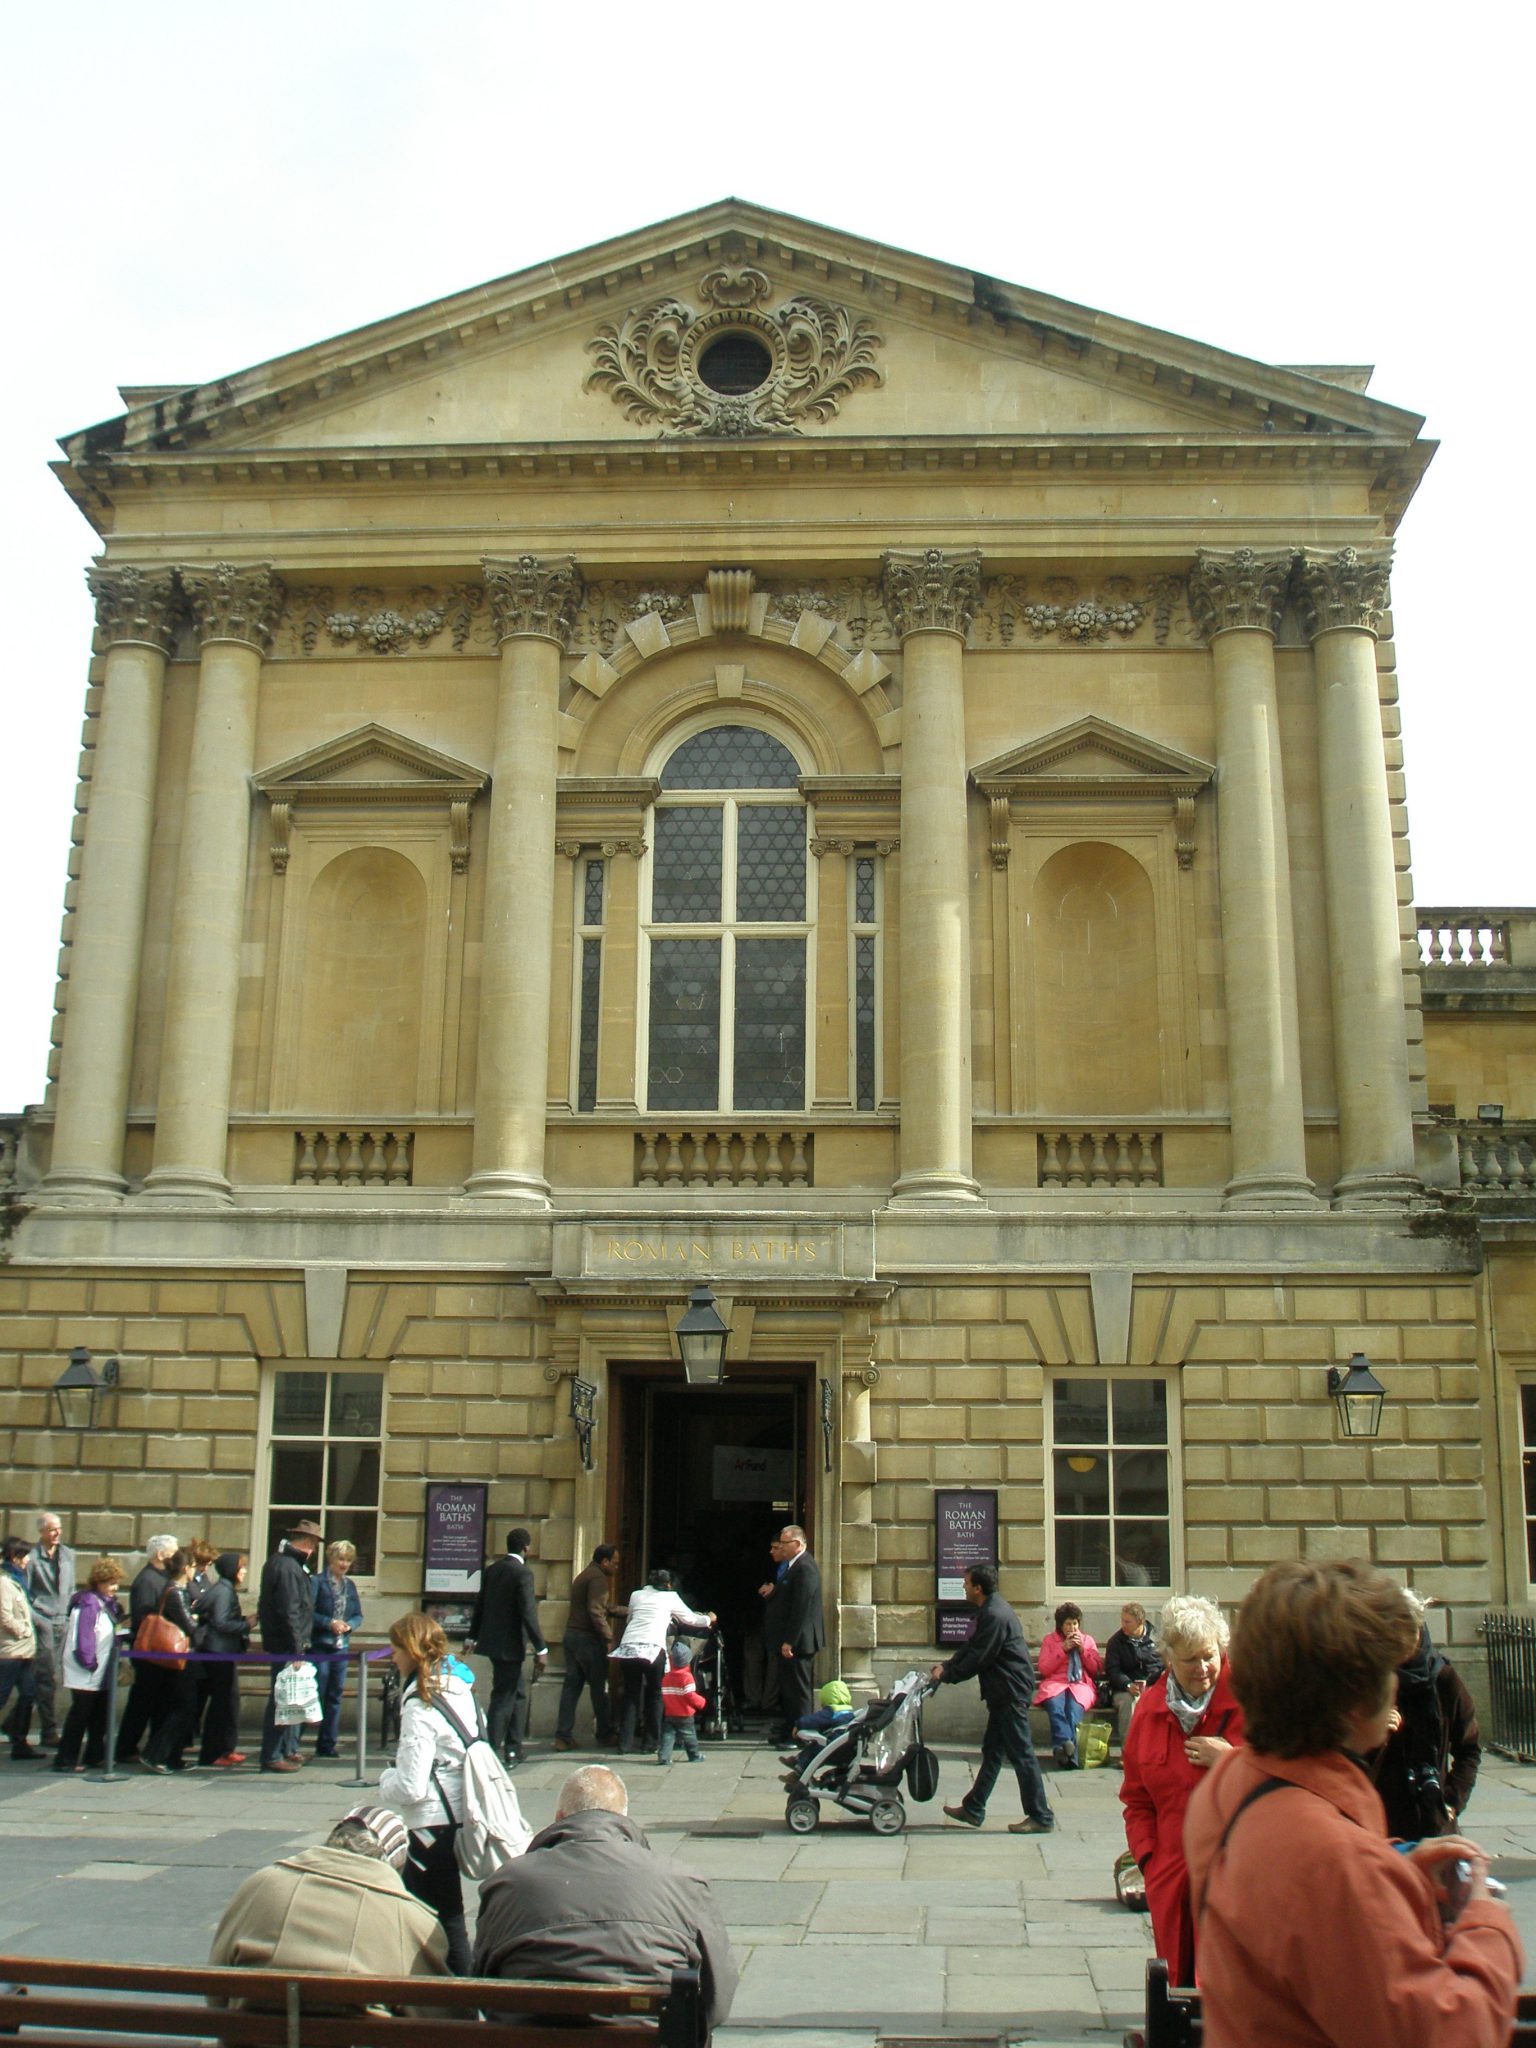 Entry to the Roman Baths